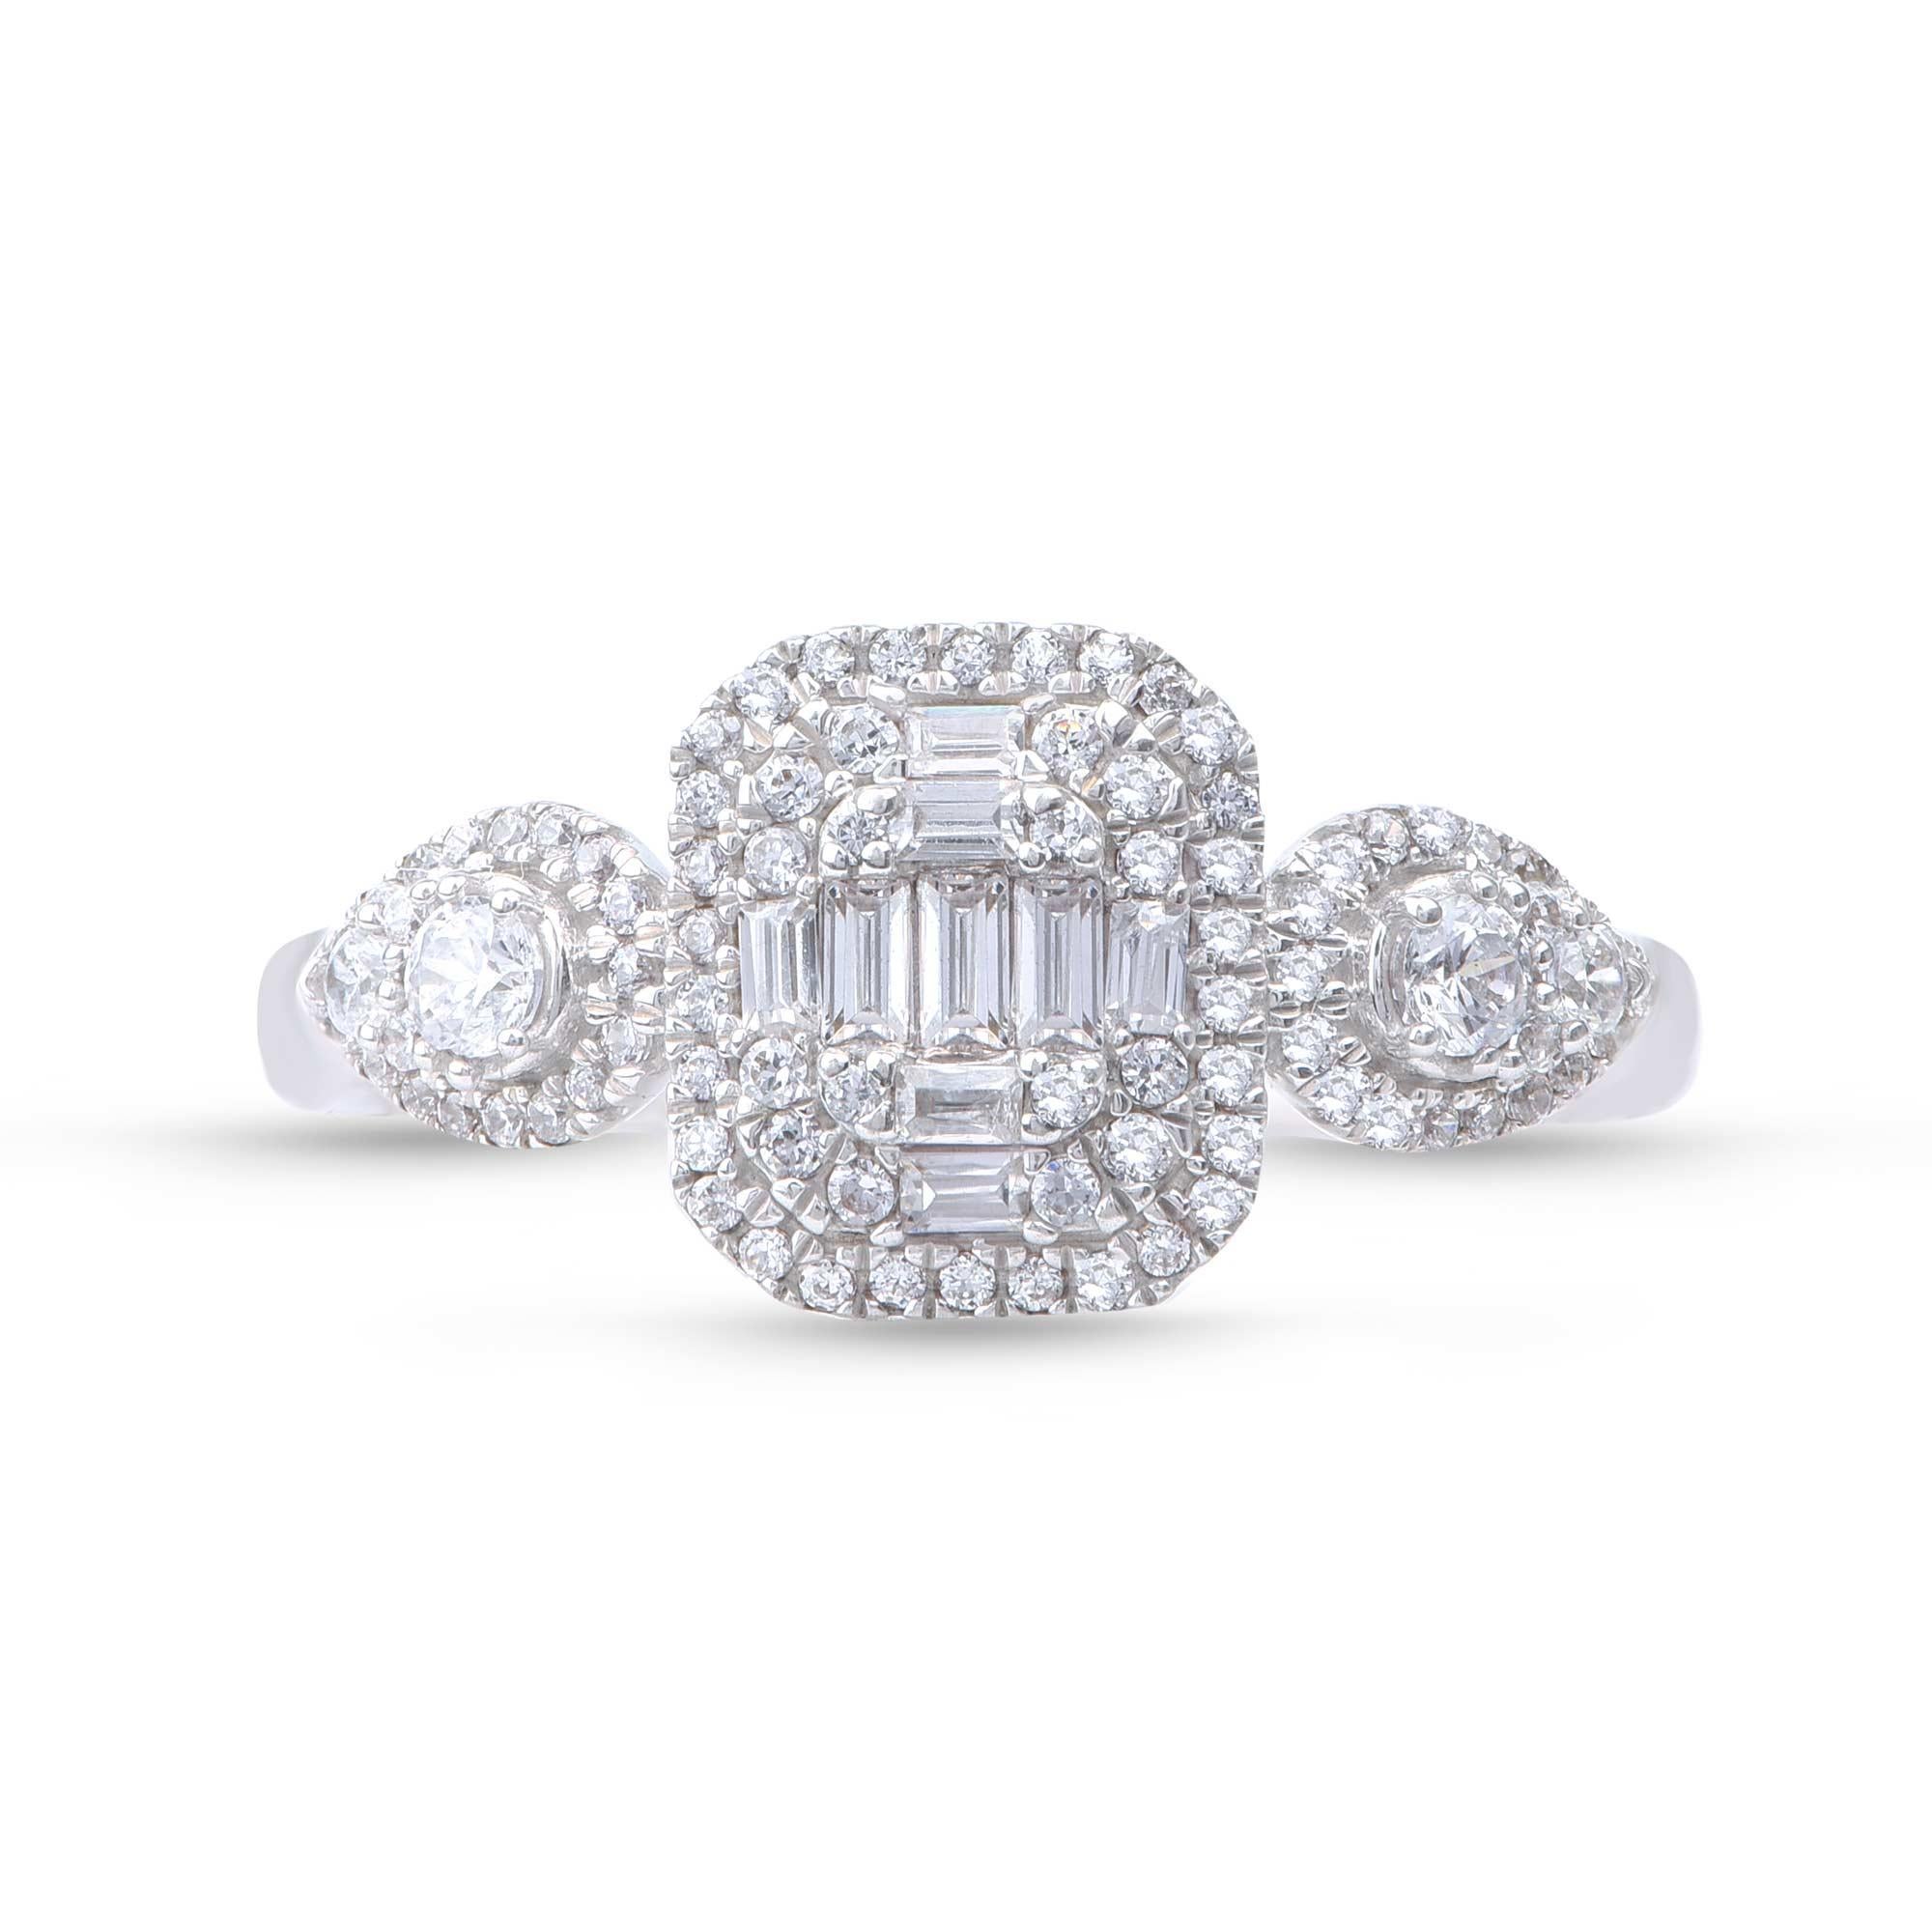 Studded with 90 brilliant and 9 baguette shape diamonds elegantly set in prong and micro-prong setting and fashioned in 18 kt white gold. Diamonds are graded H-I Color, I2 Clarity. 

Diamonds are graded H-I Color, I2 Clarity. 

Metal color and ring